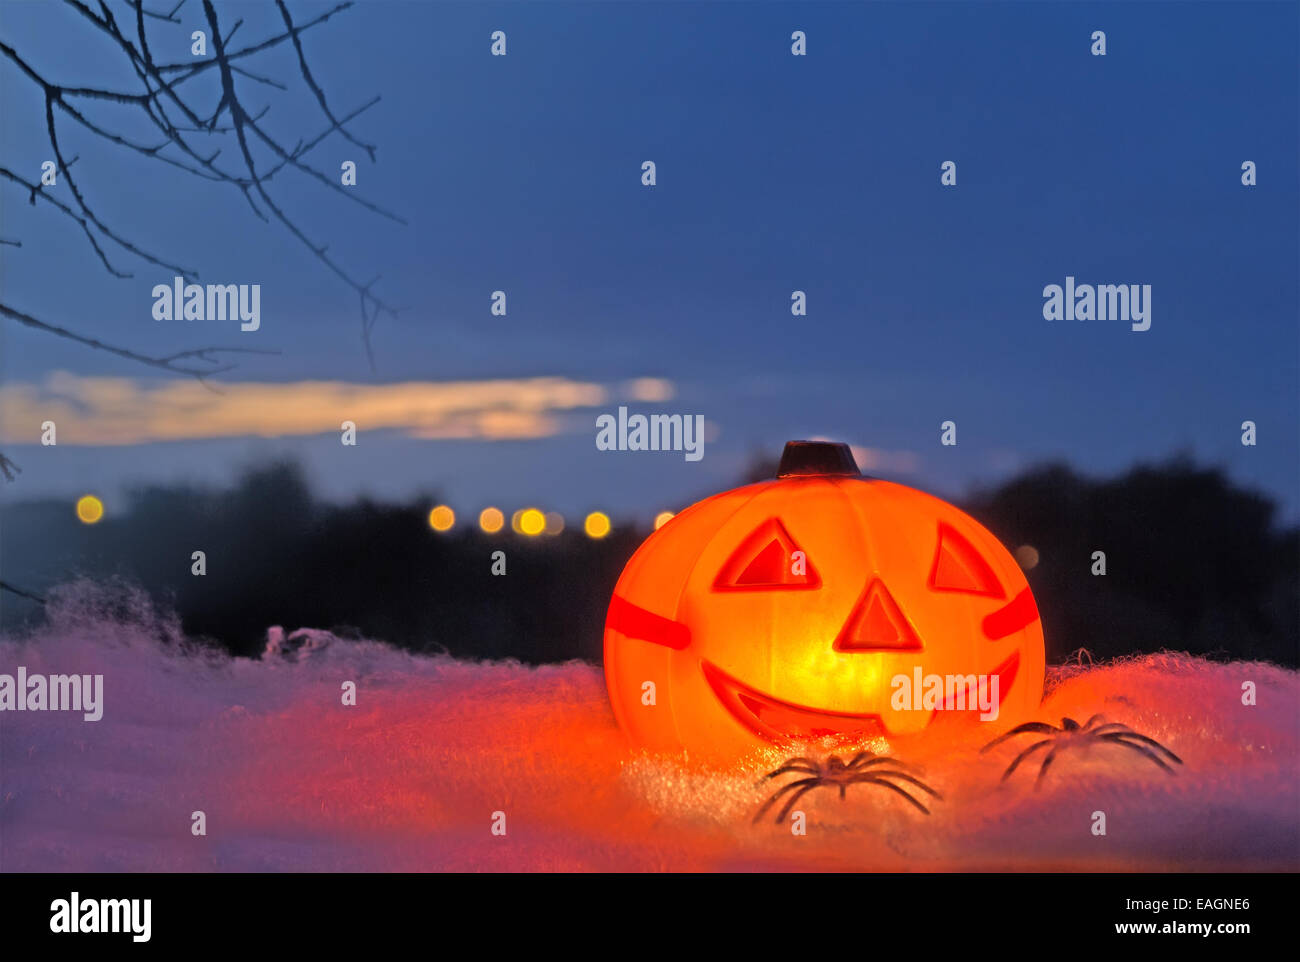 halloween pumpkin on a white spider web at sunset Stock Photo